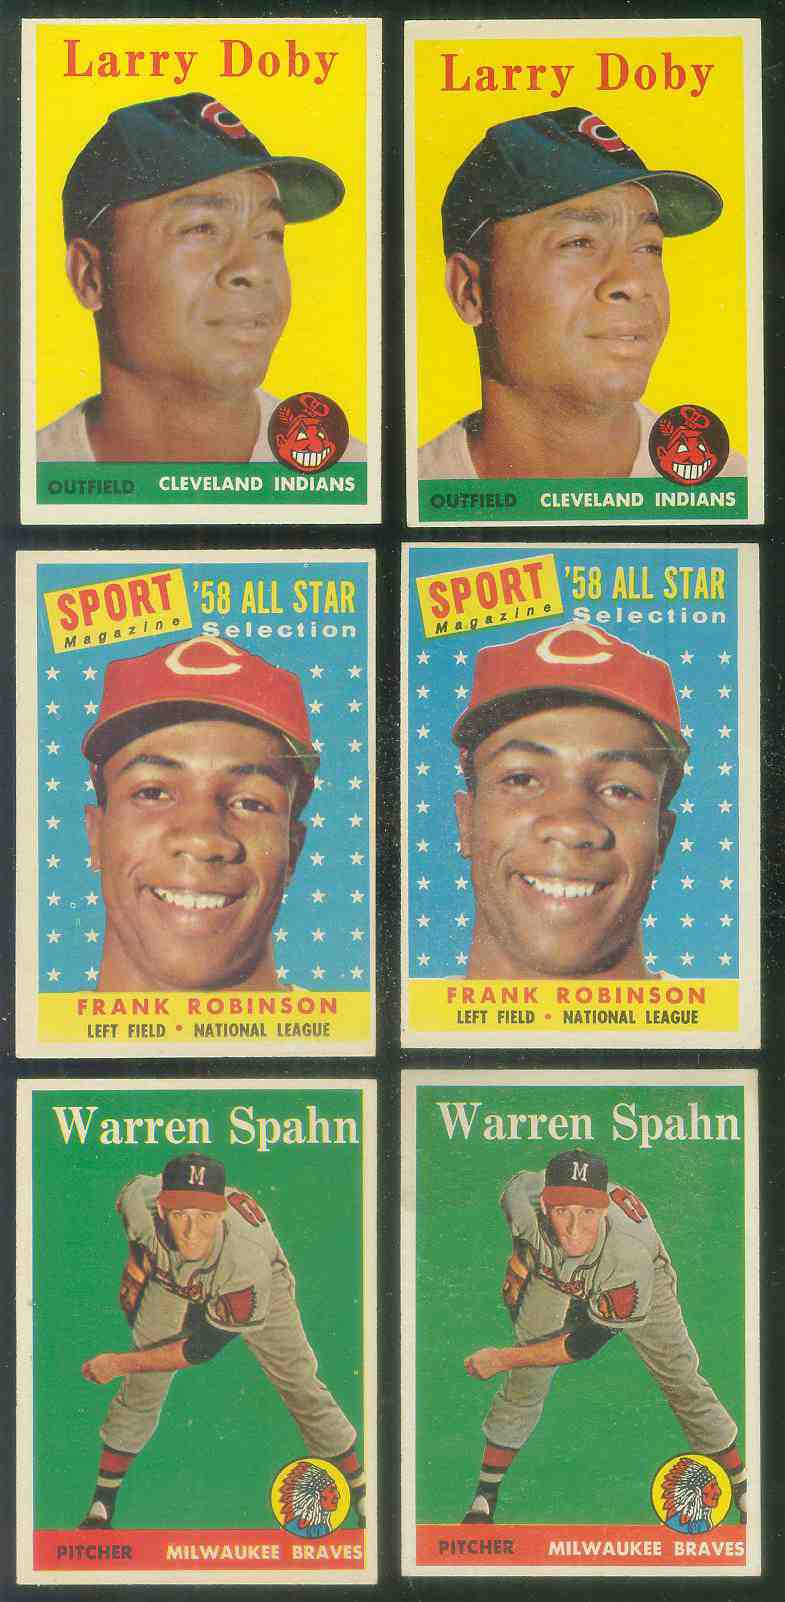 1958 Topps #424 Larry Doby [#] (Indians) Baseball cards value